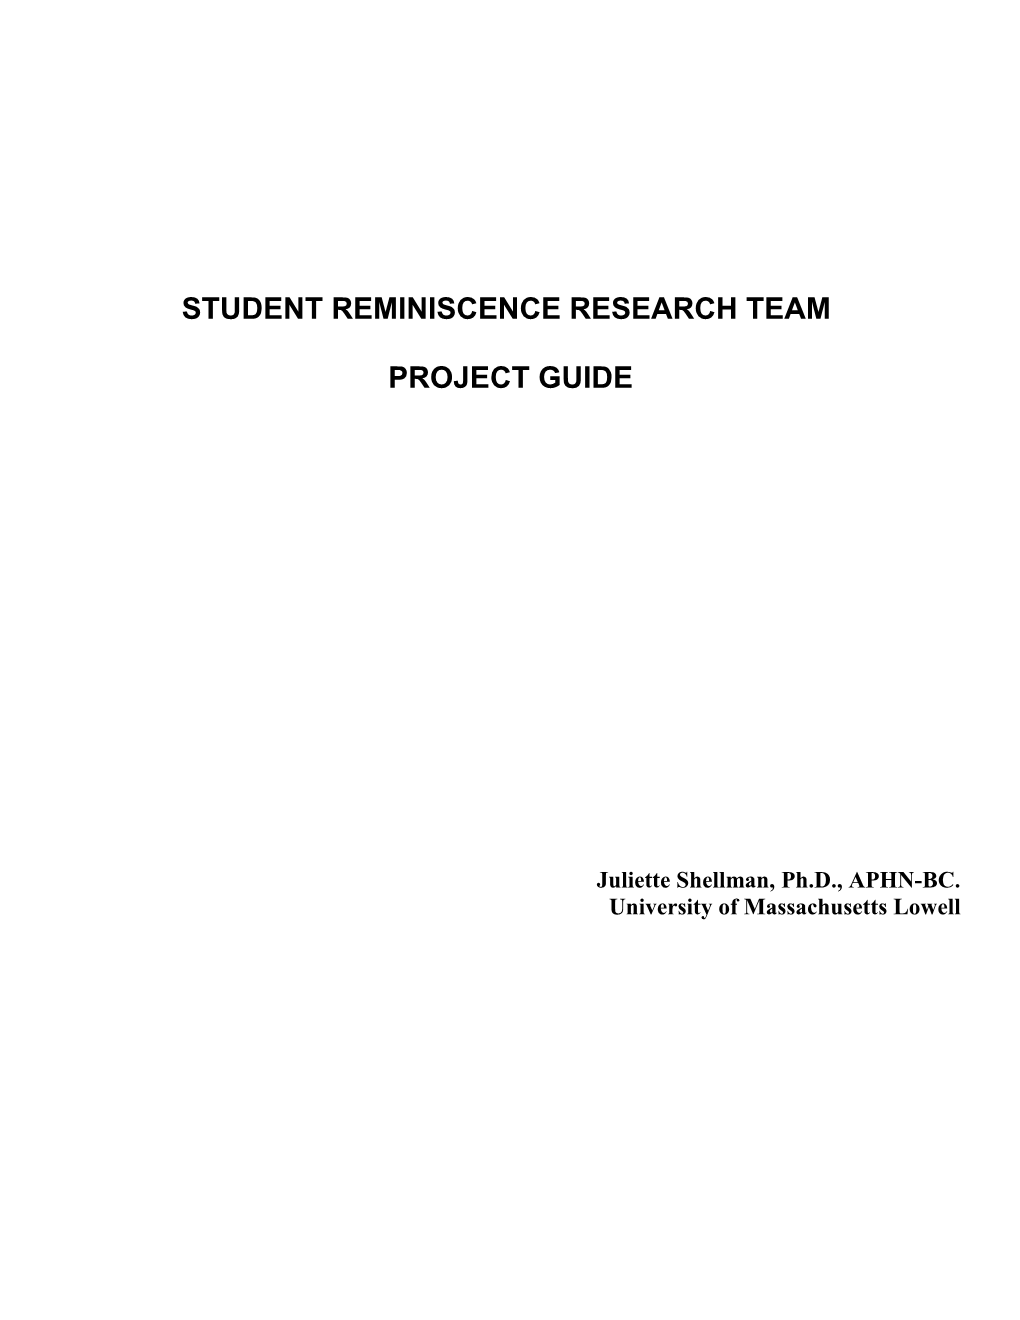 Student Reminiscence Research Team